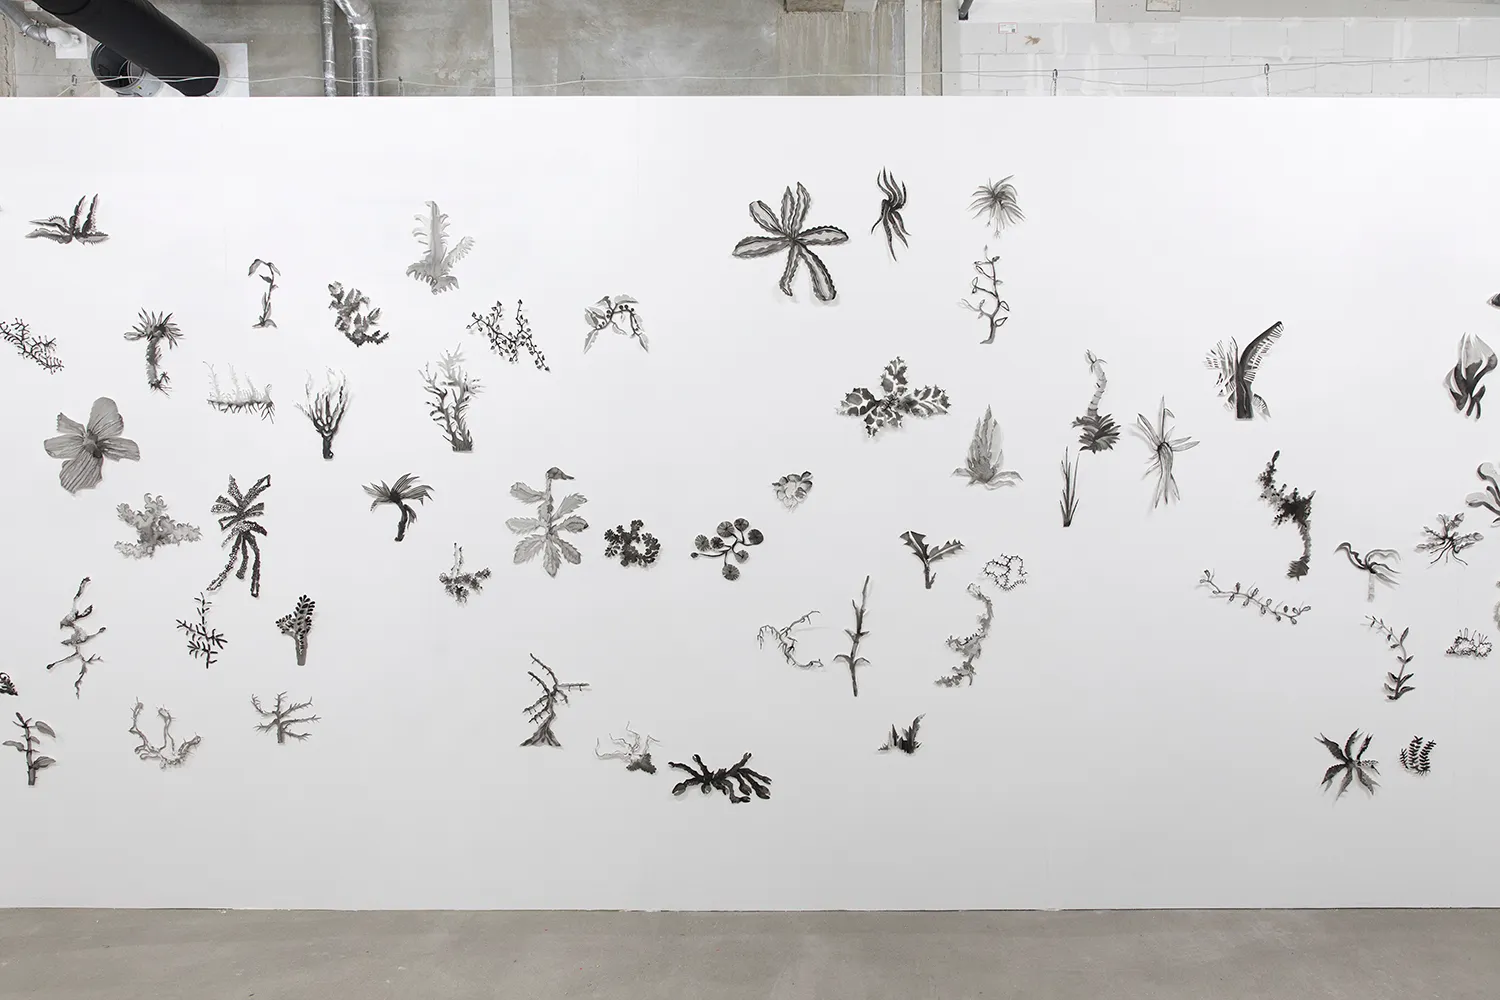 Another wall with many black & white paper cut outs of plant-like forms